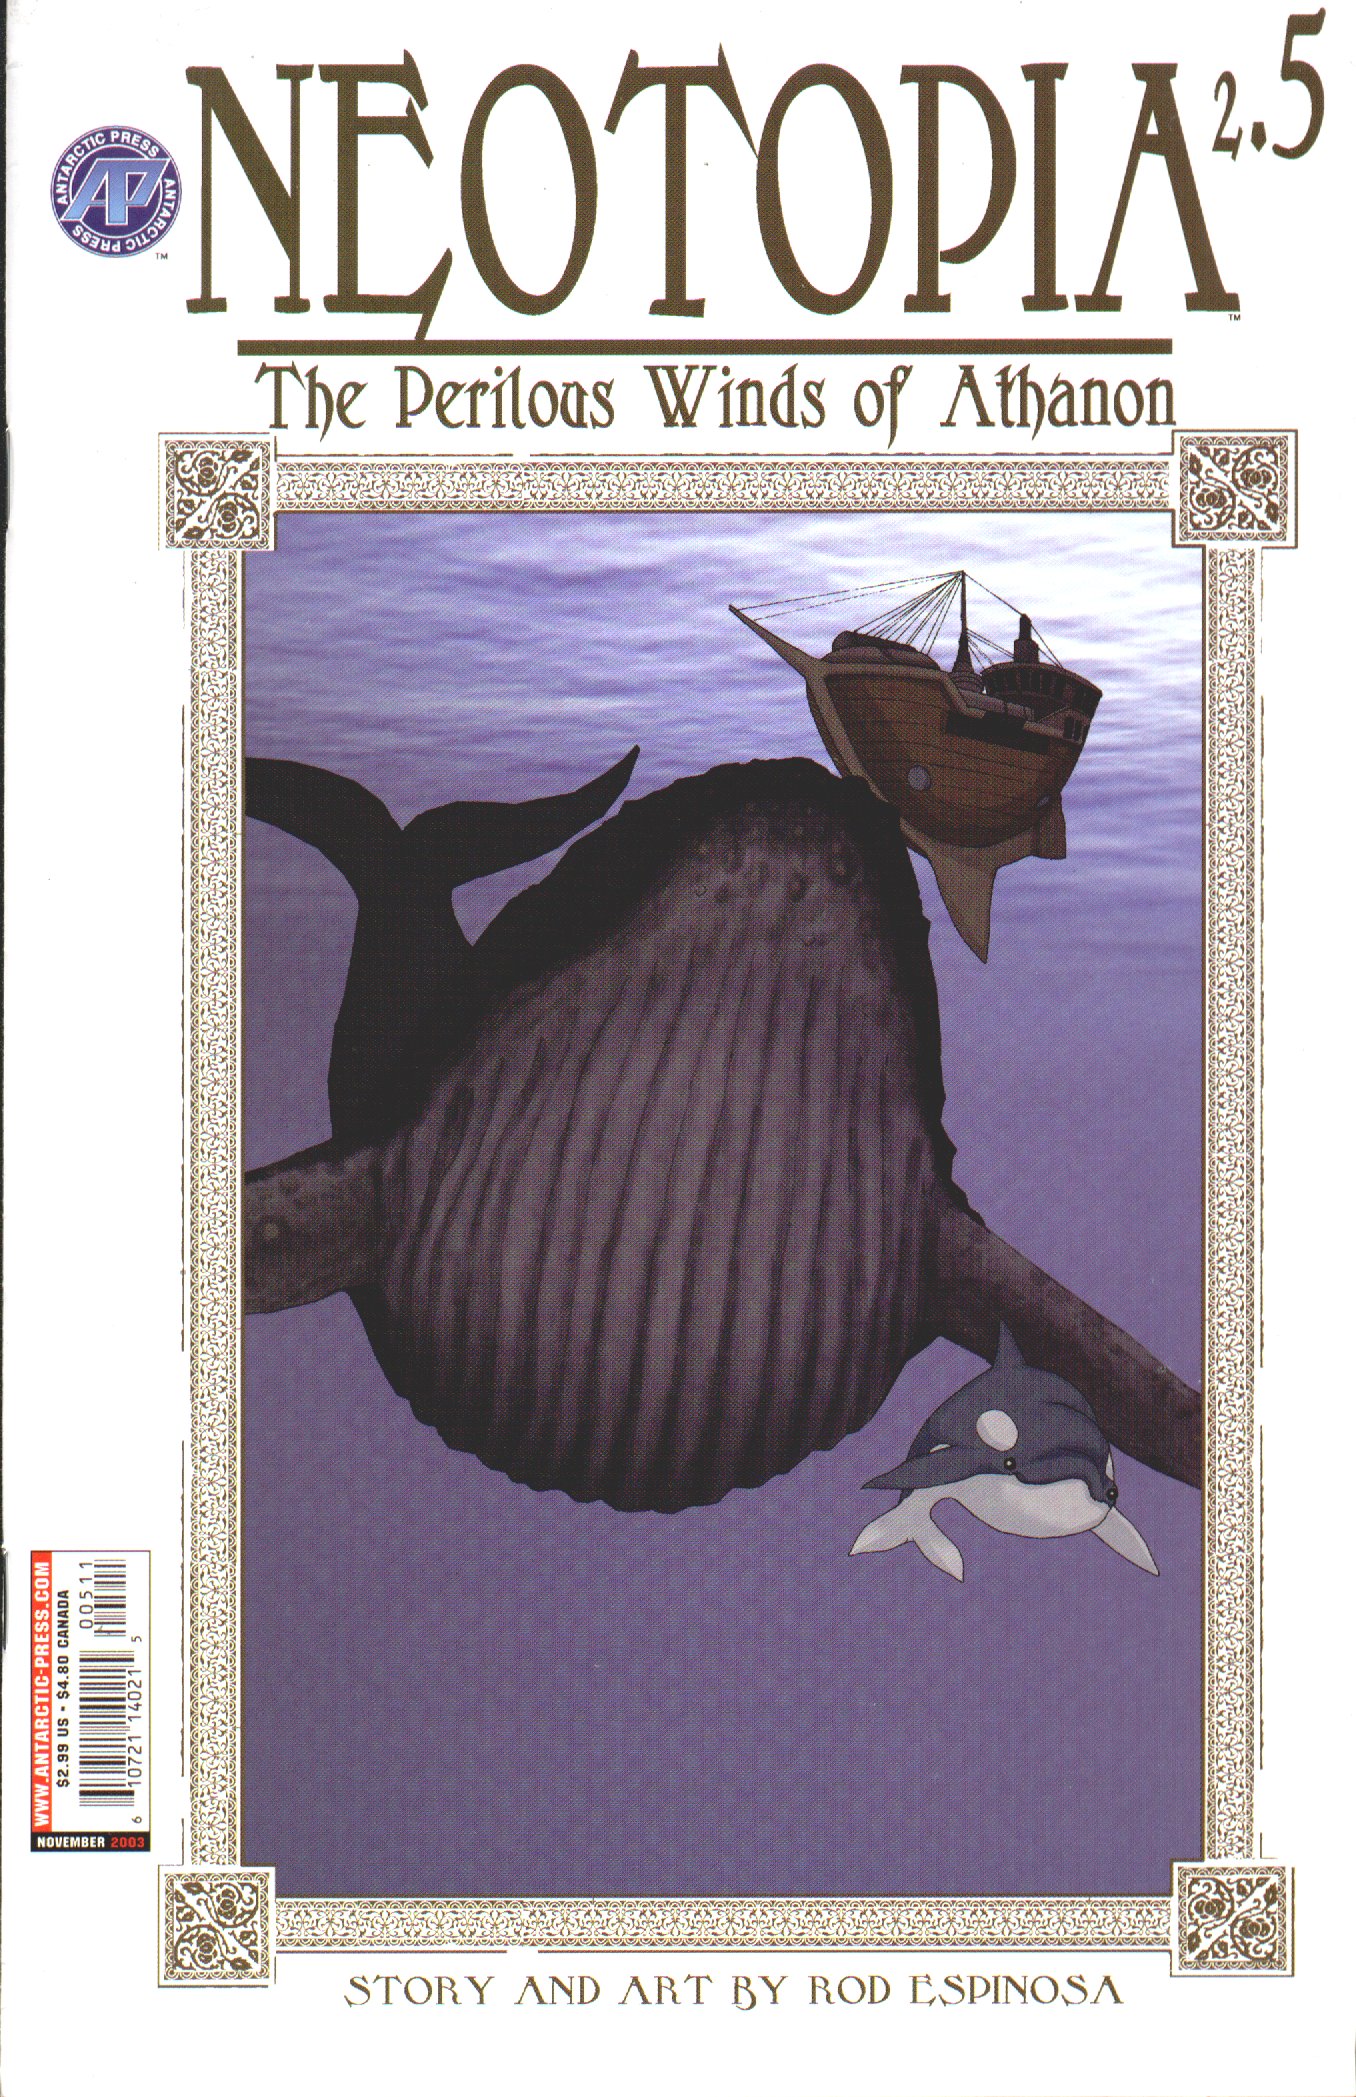 Read online Neotopia Vol. 2: The Perilous Winds of Athanon comic -  Issue #5 - 1